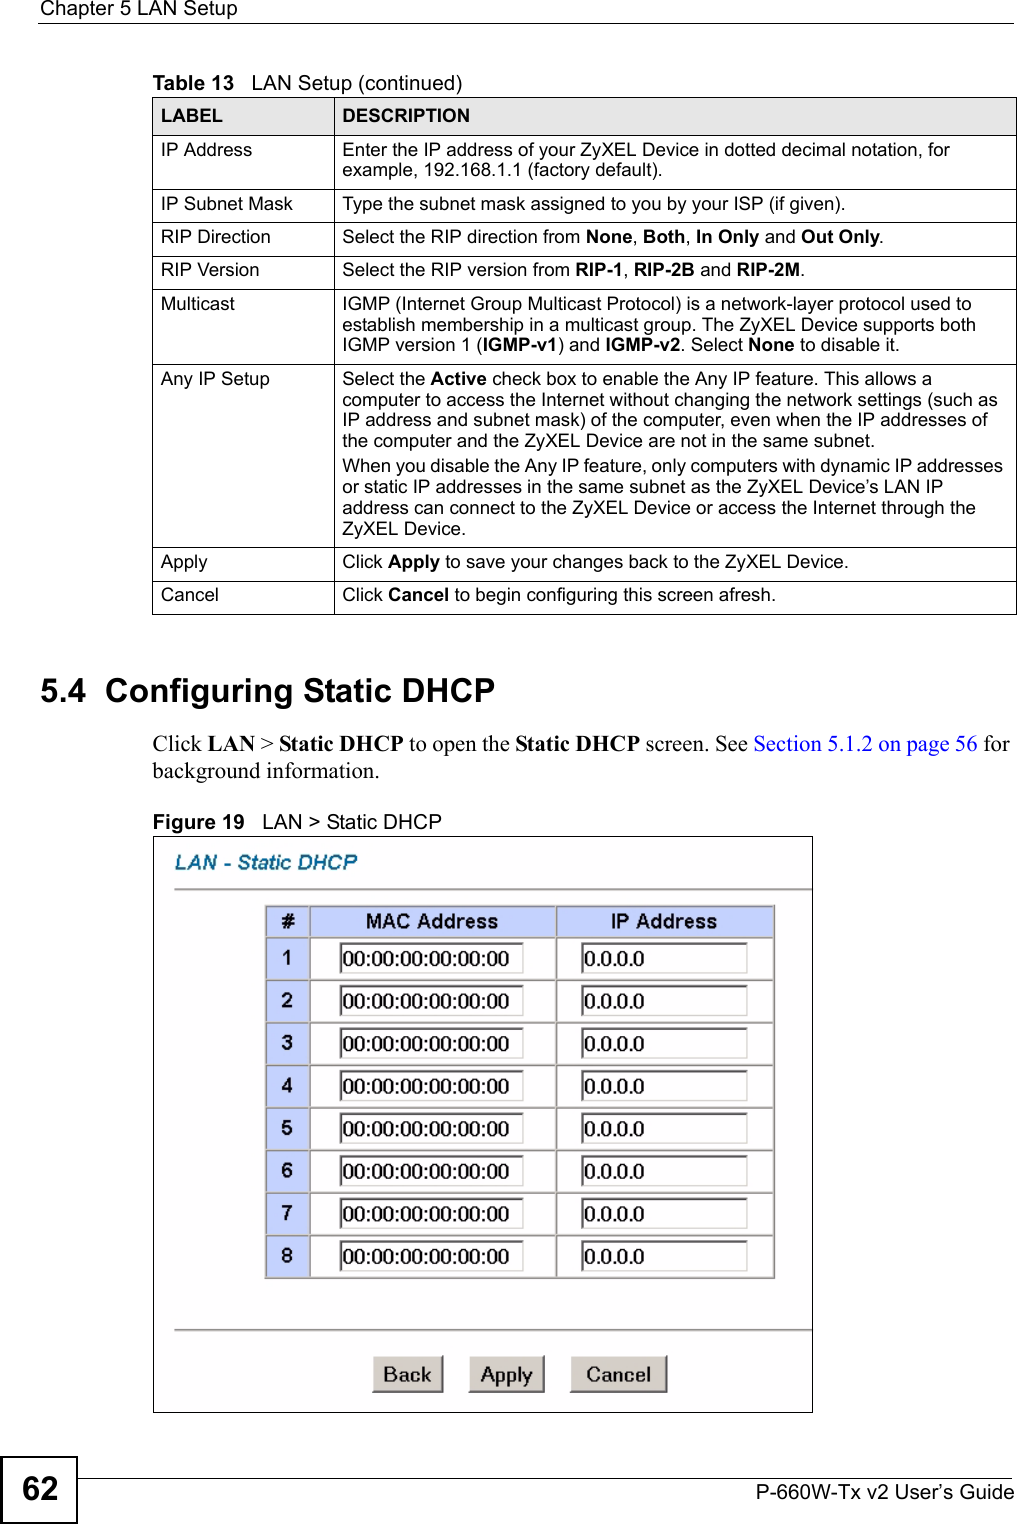 Chapter 5 LAN SetupP-660W-Tx v2 User’s Guide625.4  Configuring Static DHCP Click LAN &gt; Static DHCP to open the Static DHCP screen. See Section 5.1.2 on page 56 for background information. Figure 19   LAN &gt; Static DHCPIP Address Enter the IP address of your ZyXEL Device in dotted decimal notation, for example, 192.168.1.1 (factory default). IP Subnet Mask  Type the subnet mask assigned to you by your ISP (if given).RIP Direction Select the RIP direction from None, Both, In Only and Out Only.RIP Version Select the RIP version from RIP-1, RIP-2B and RIP-2M.Multicast IGMP (Internet Group Multicast Protocol) is a network-layer protocol used to establish membership in a multicast group. The ZyXEL Device supports both IGMP version 1 (IGMP-v1) and IGMP-v2. Select None to disable it.Any IP Setup Select the Active check box to enable the Any IP feature. This allows a computer to access the Internet without changing the network settings (such as IP address and subnet mask) of the computer, even when the IP addresses of the computer and the ZyXEL Device are not in the same subnet. When you disable the Any IP feature, only computers with dynamic IP addresses or static IP addresses in the same subnet as the ZyXEL Device’s LAN IP address can connect to the ZyXEL Device or access the Internet through the ZyXEL Device.Apply Click Apply to save your changes back to the ZyXEL Device.Cancel Click Cancel to begin configuring this screen afresh.Table 13   LAN Setup (continued)LABEL DESCRIPTION